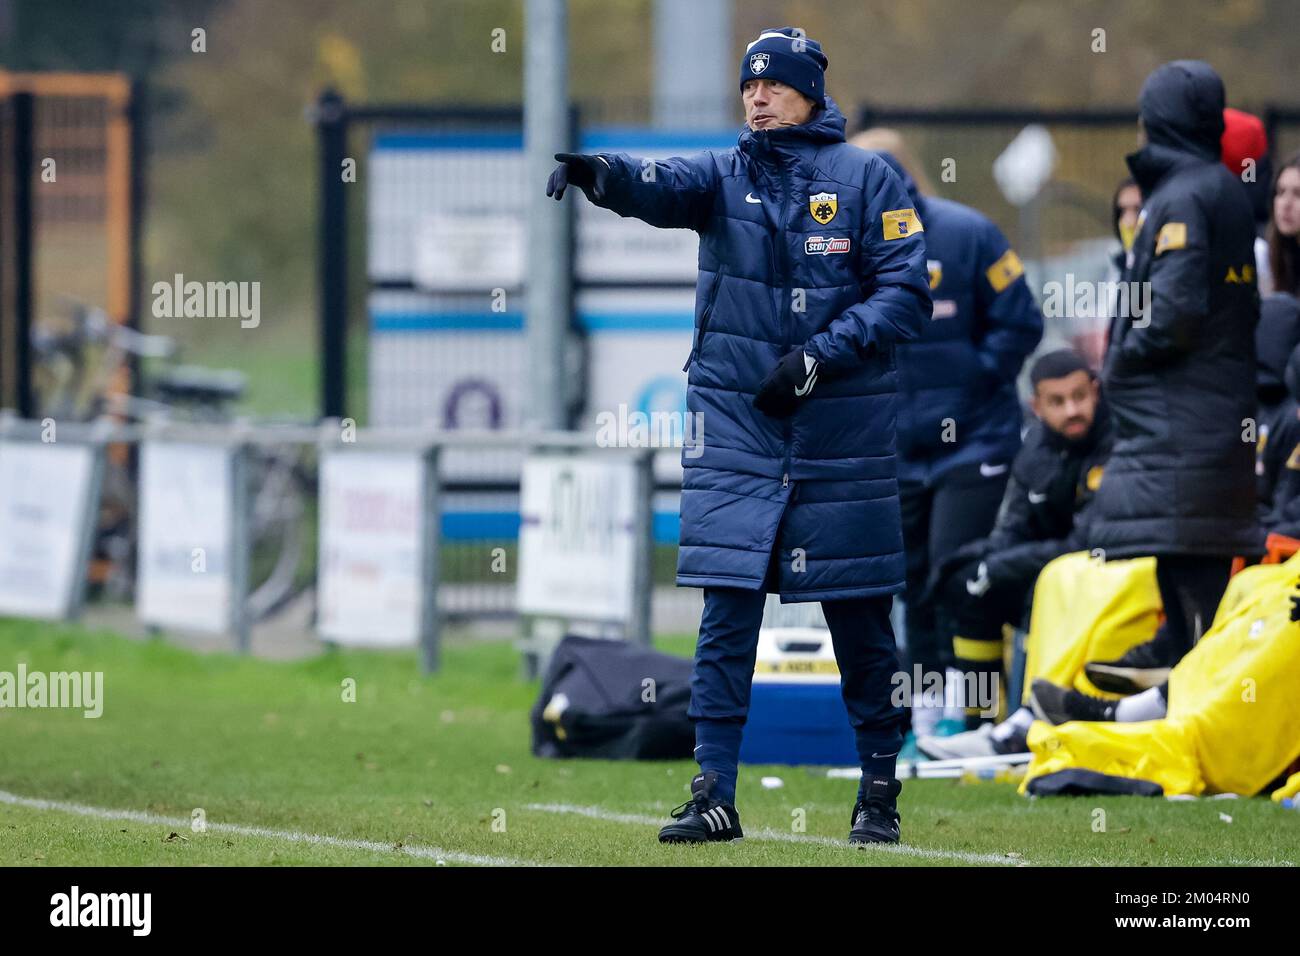 BURGH-HAAMSTEDE, NETHERLANDS - DECEMBER 4: Coach Matias Almeyda of AEK Athens during the Friendly match between AEK Athens and RFC Seraing at Sportpark van Zuijen on December 4, 2022 in Burgh-Haamstede, Netherlands (Photo by Broer van den Boom/Orange Pictures) Stock Photo